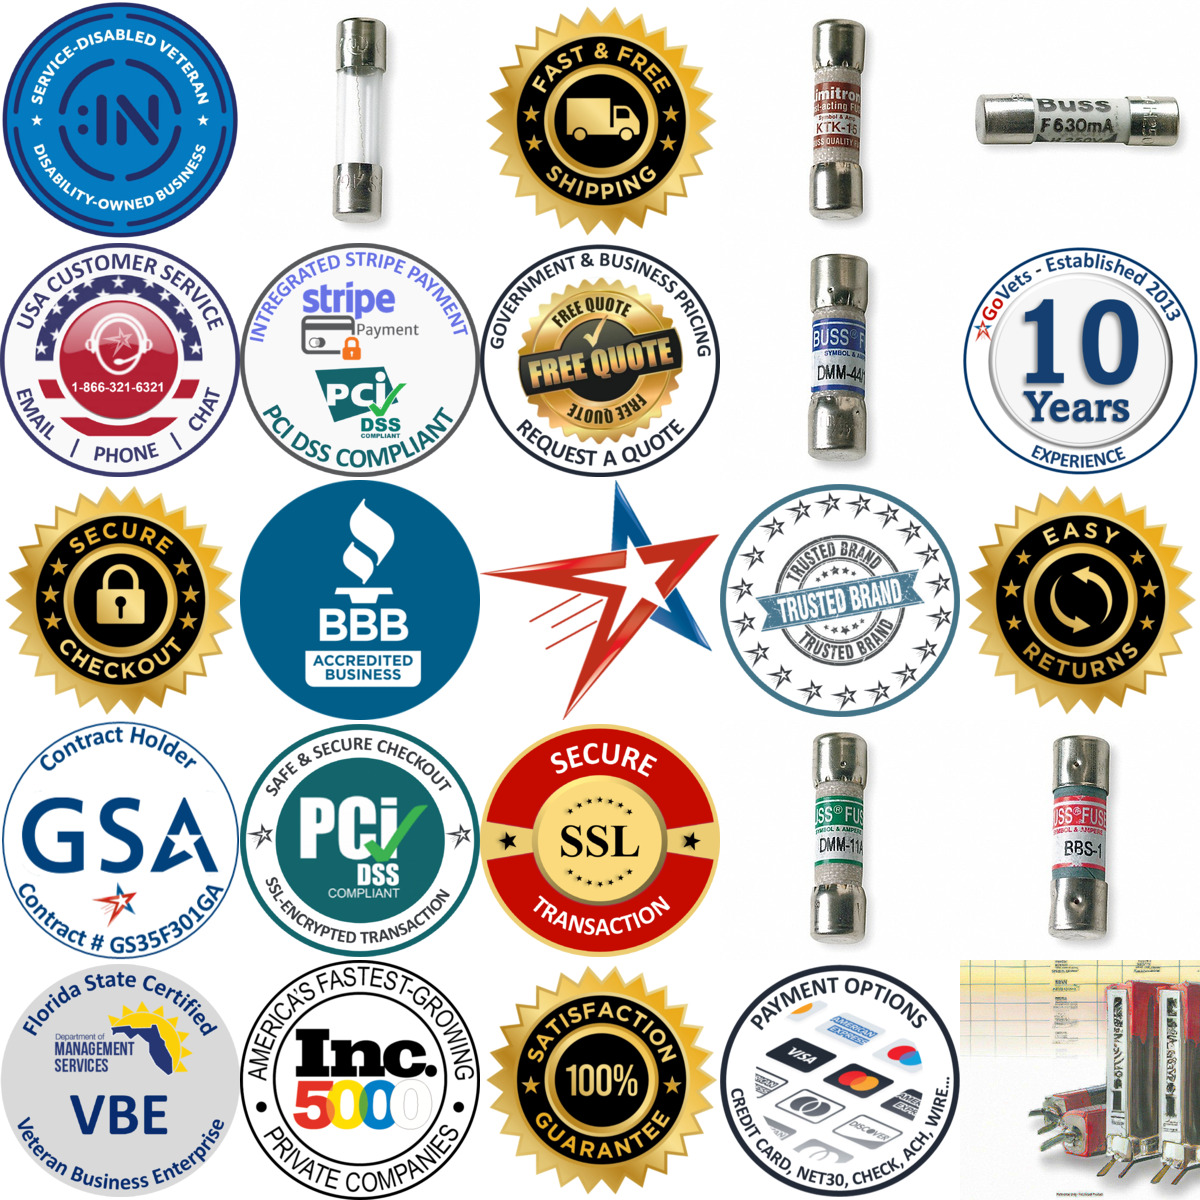 A selection of Multimeter Fuses products on GoVets